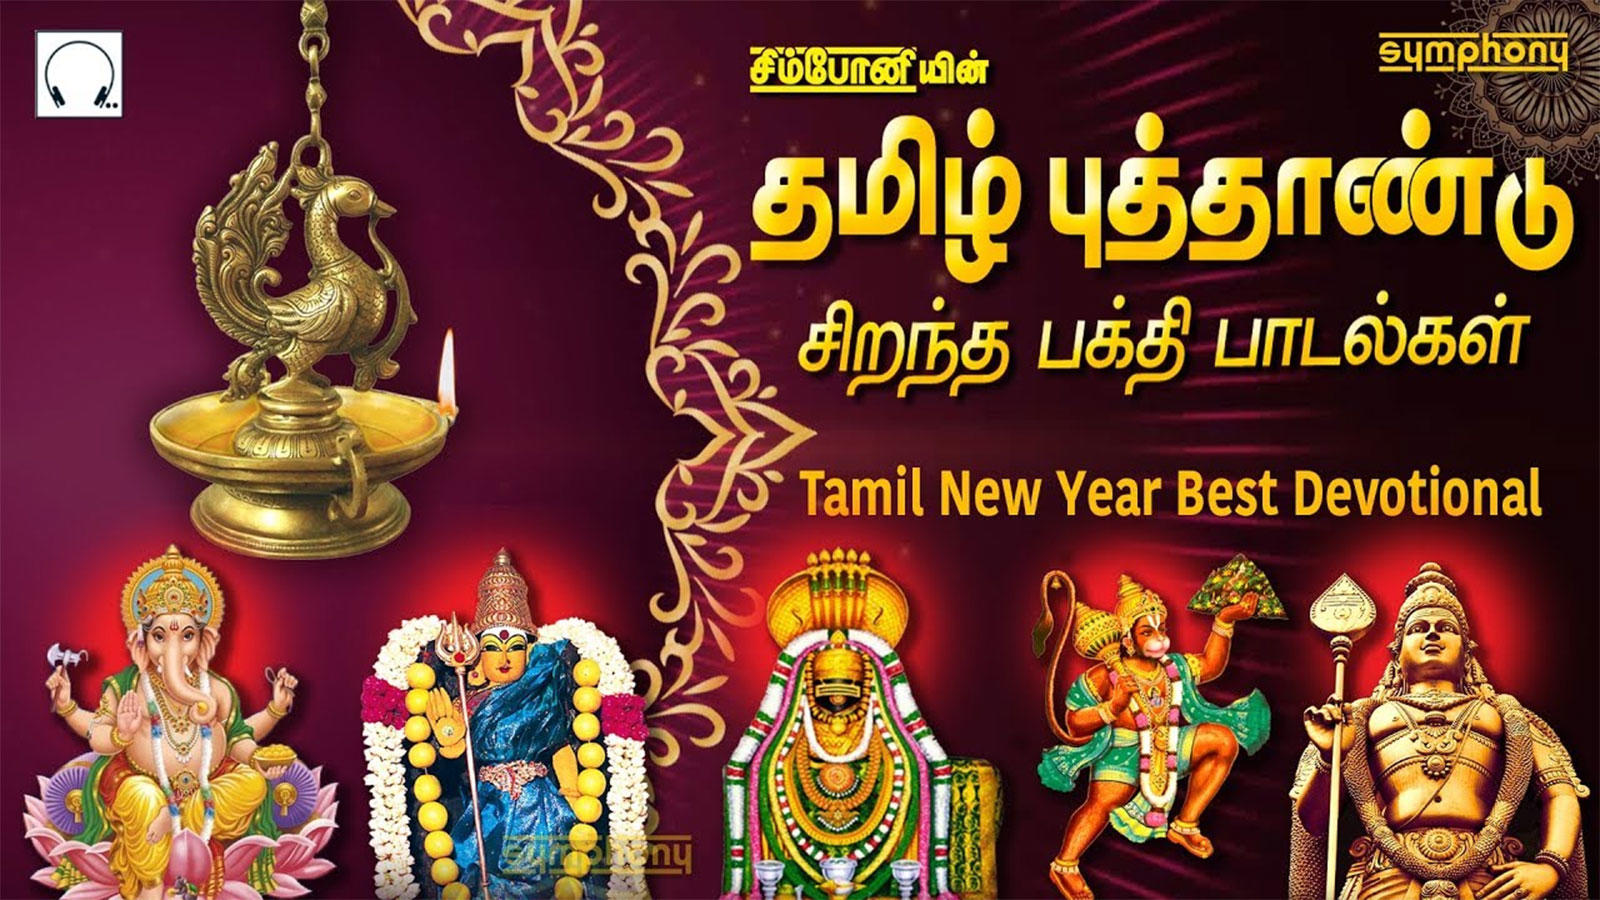 Watch Popular Tamil New Year Devotional Superhits Song Audio ...